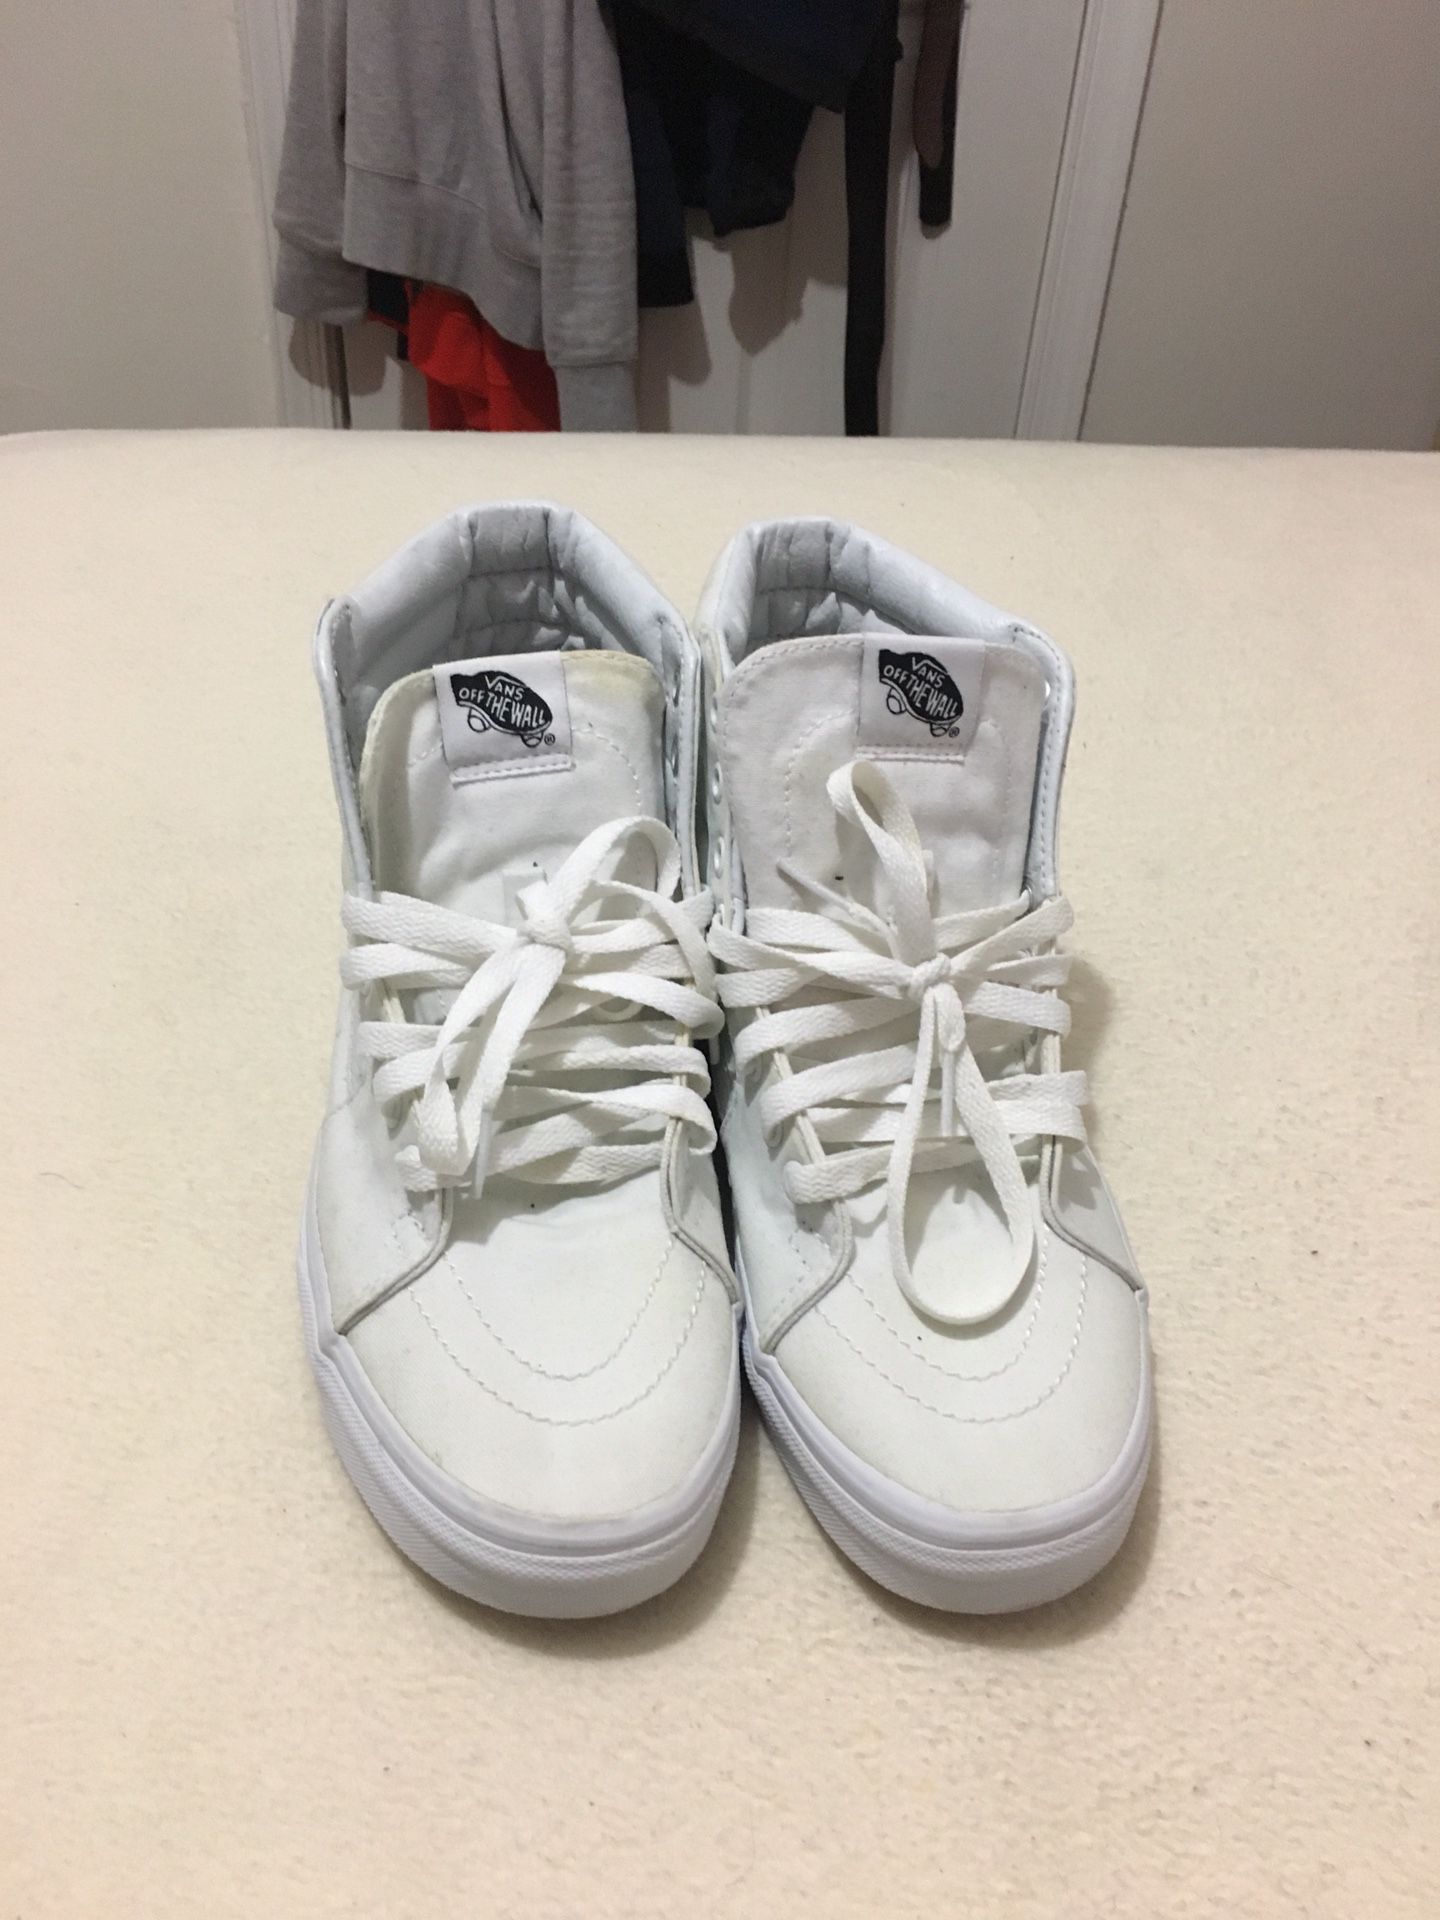 High top white Vans Size 8.5